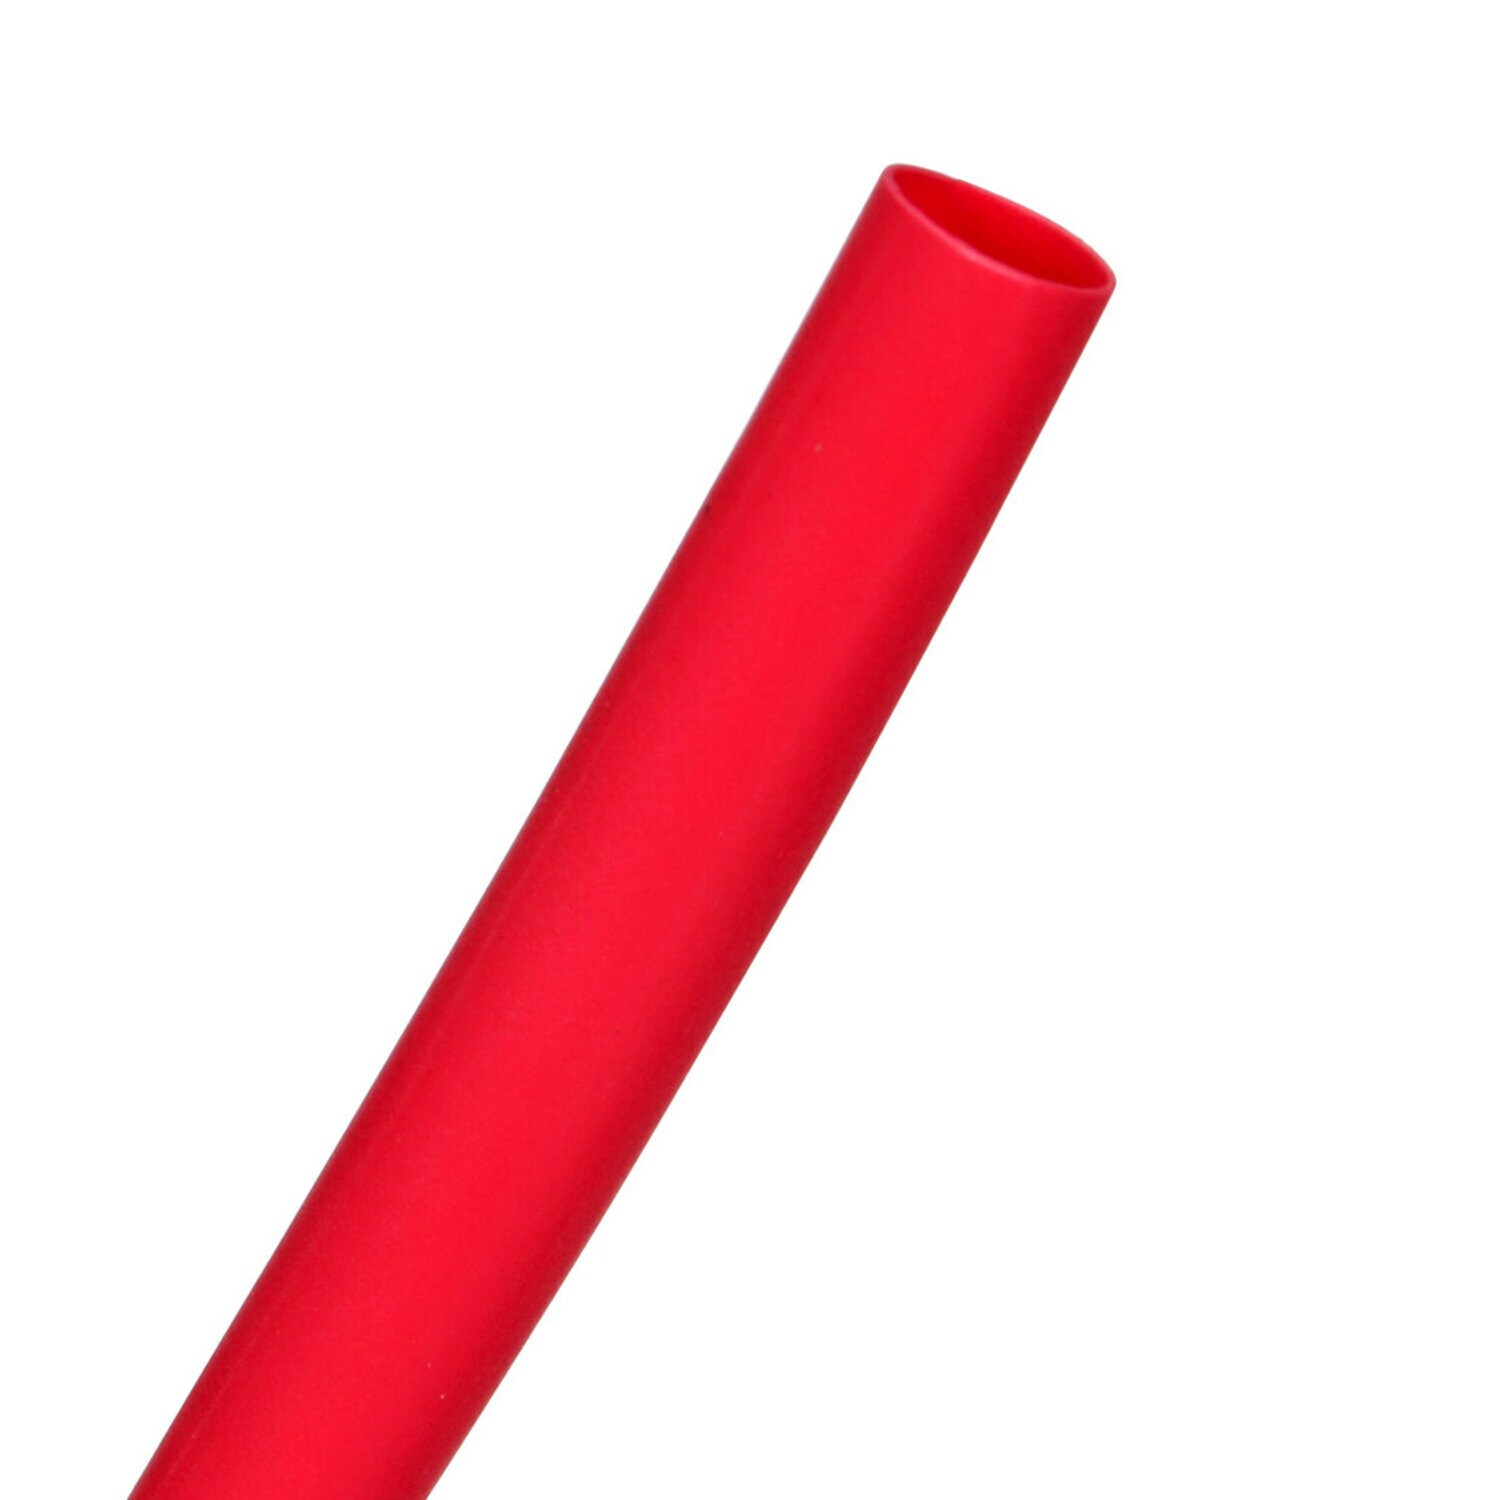 7010396209 - 3M Heat Shrink Thin-Wall Tubing FP-301-3/32-Red-500`: 500 ft spool
length, 1500 ft/box, 3 Rolls/Case